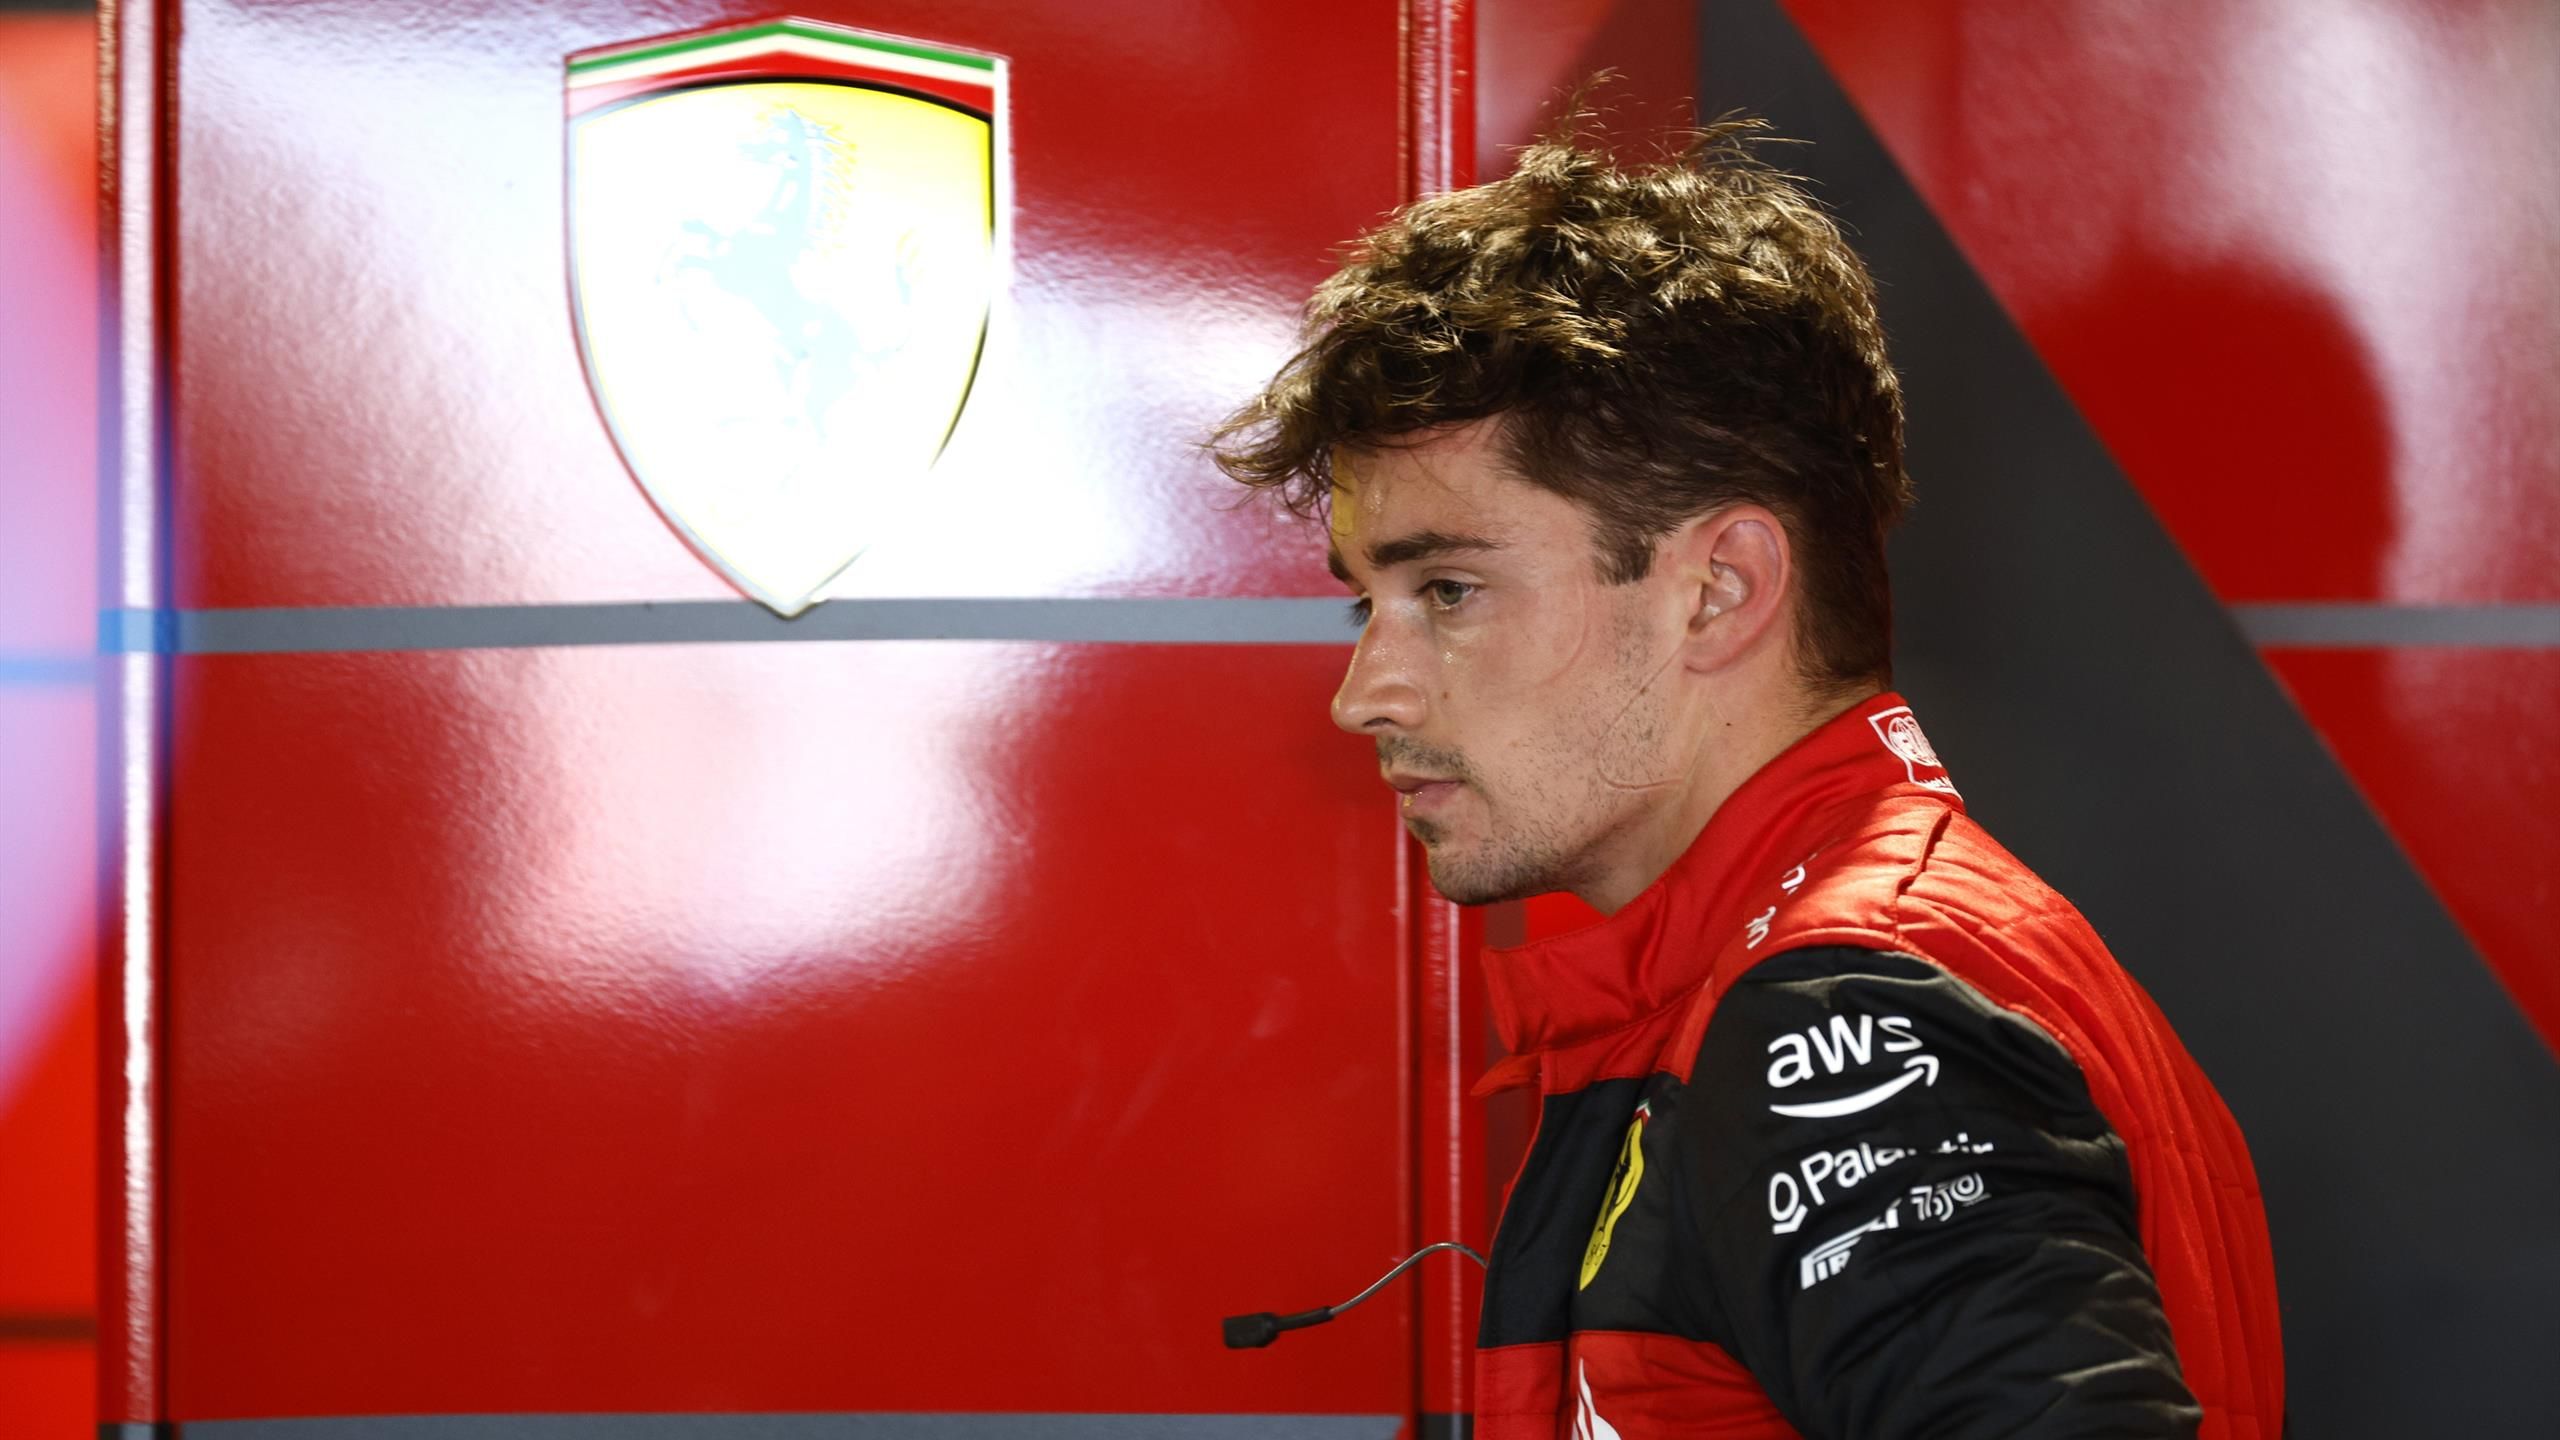 Formula 1 Driver Charles Leclerc Extends Contract with Ferrari: 'The Dream  Continues': Photo 5007836, Charles Leclerc, Formula 1, Sports Photos